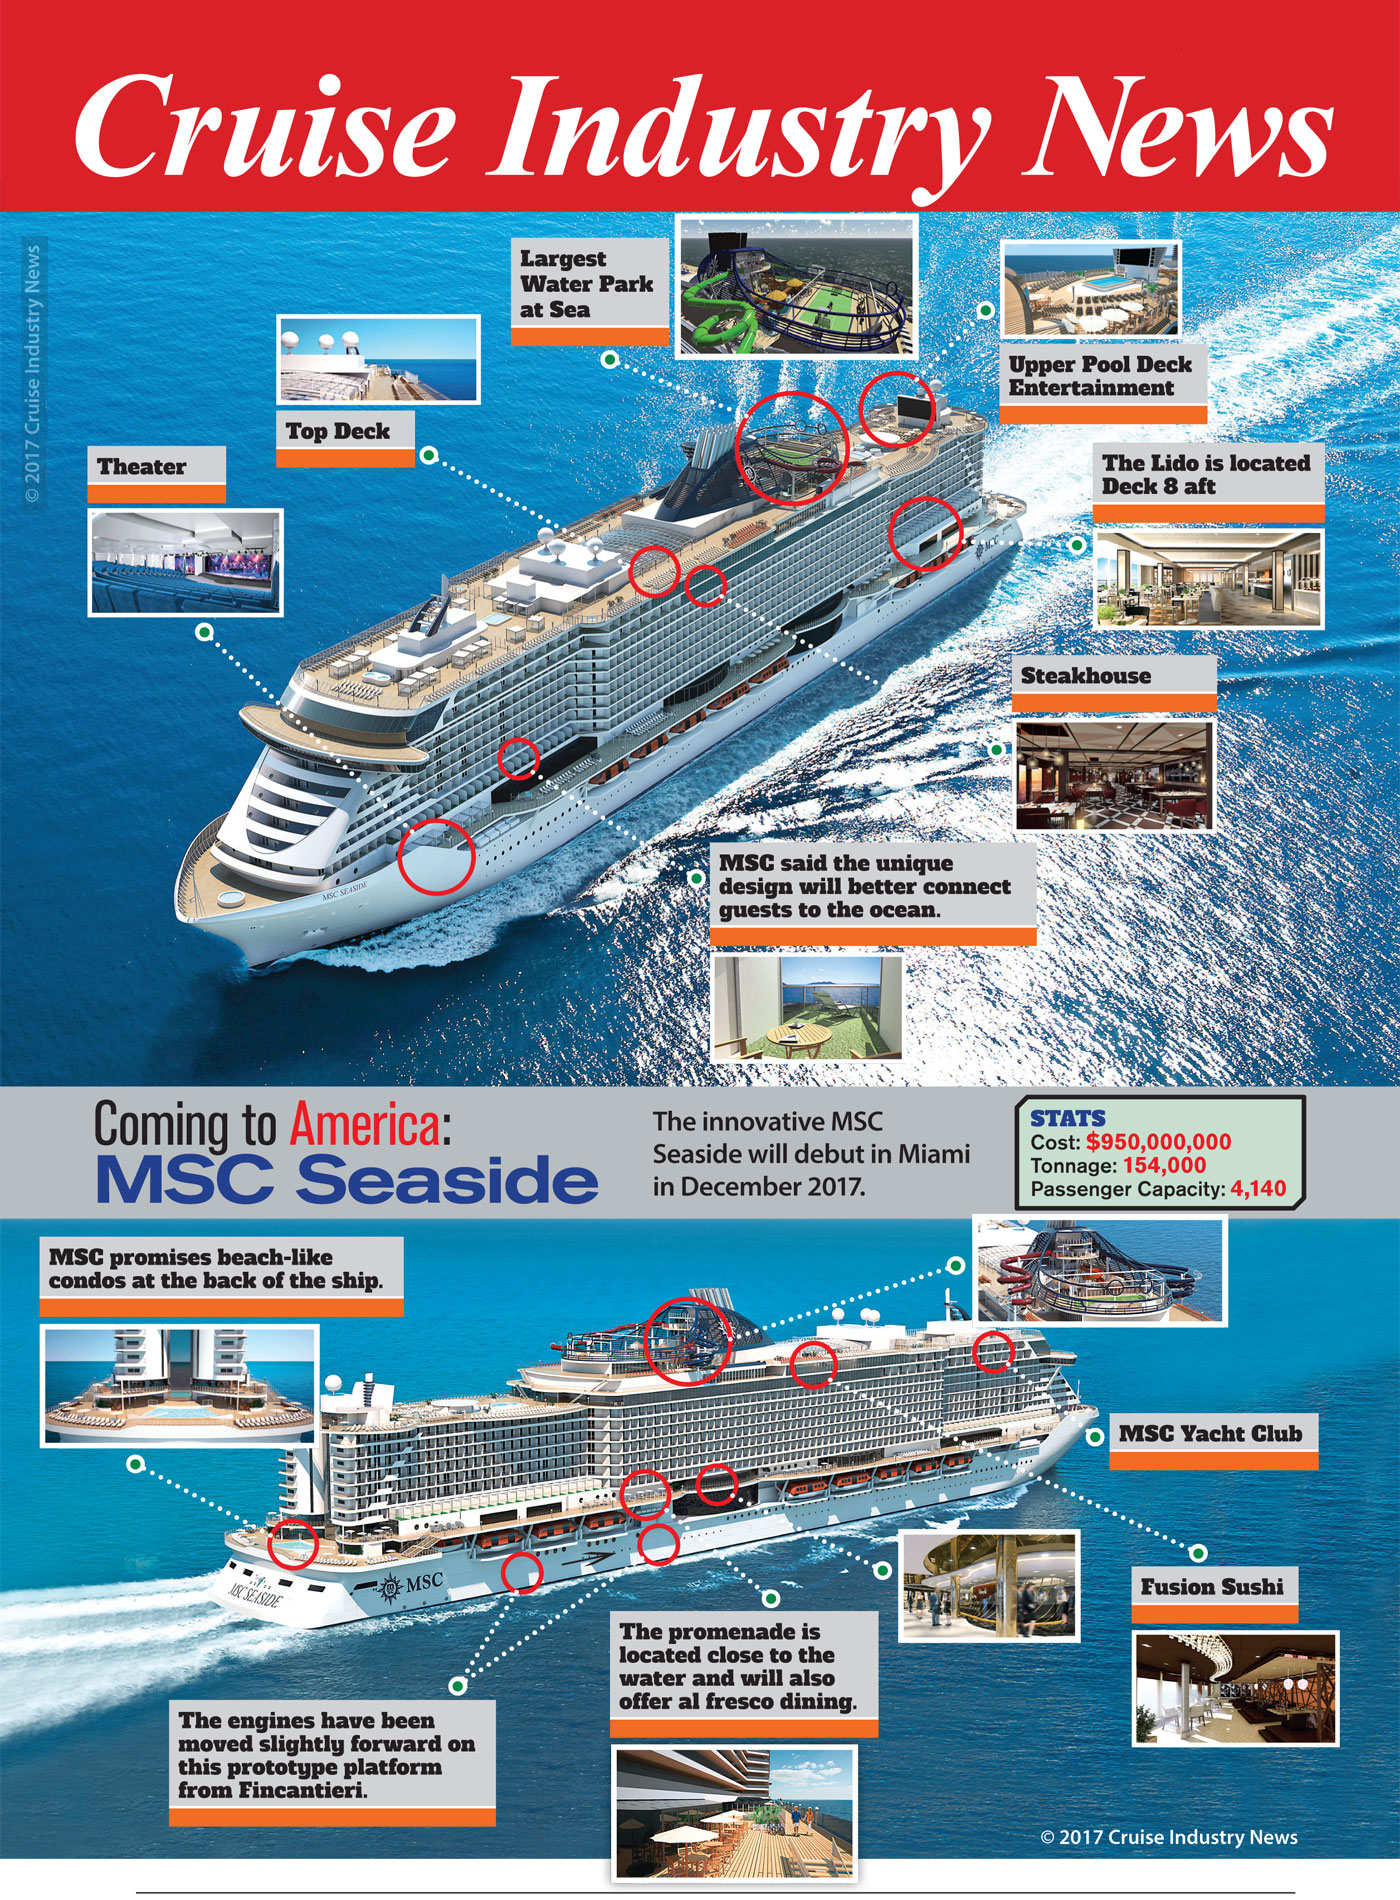 MSC Seaside Infographic by Cruise Industry News